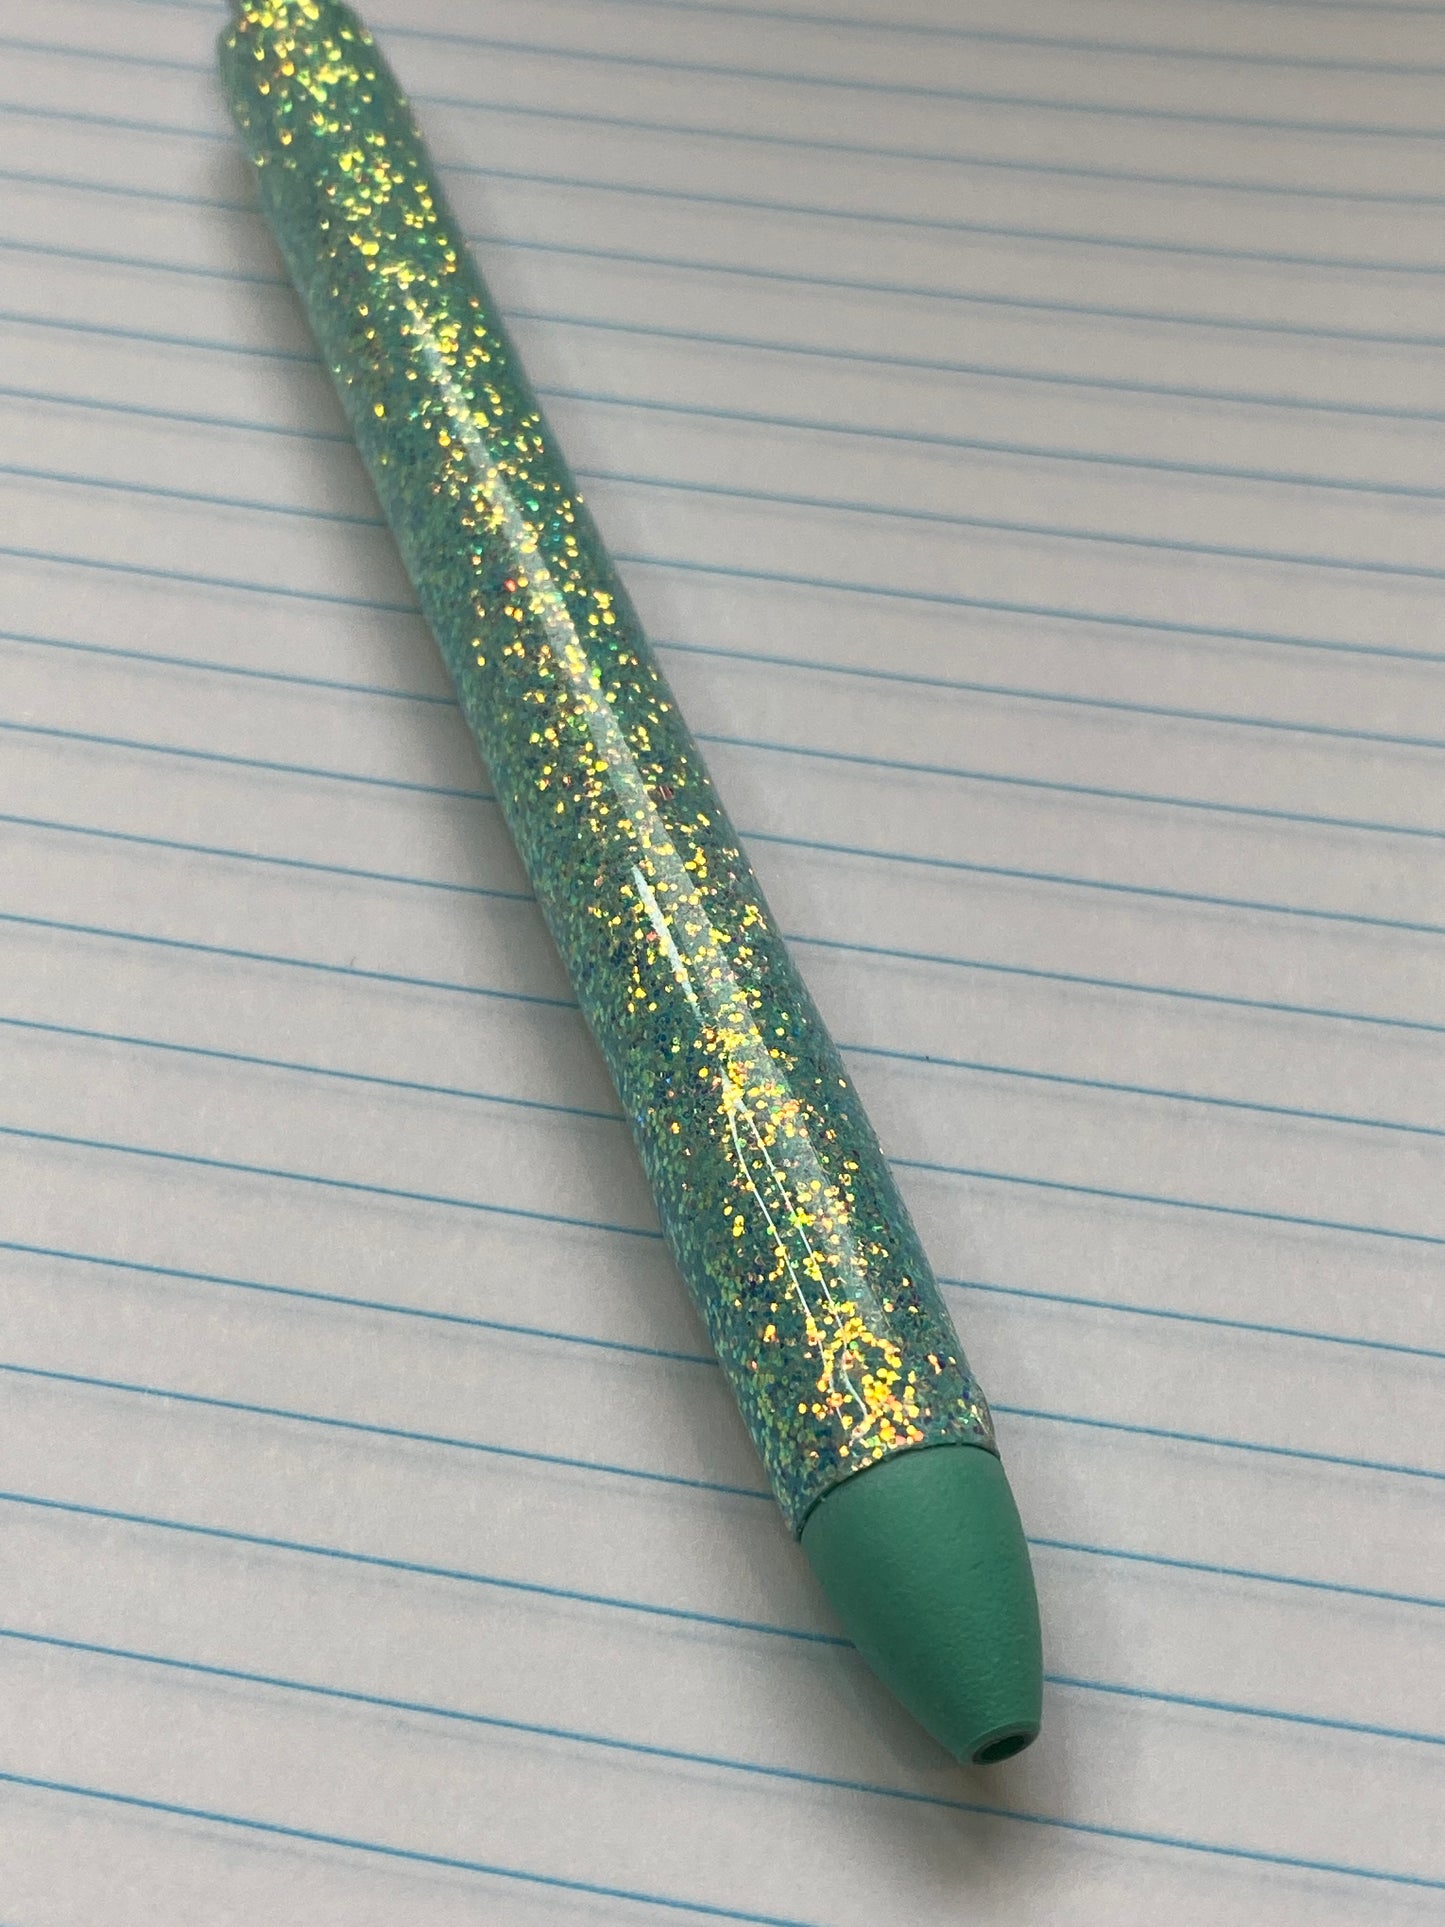 Turquoise waters Pen